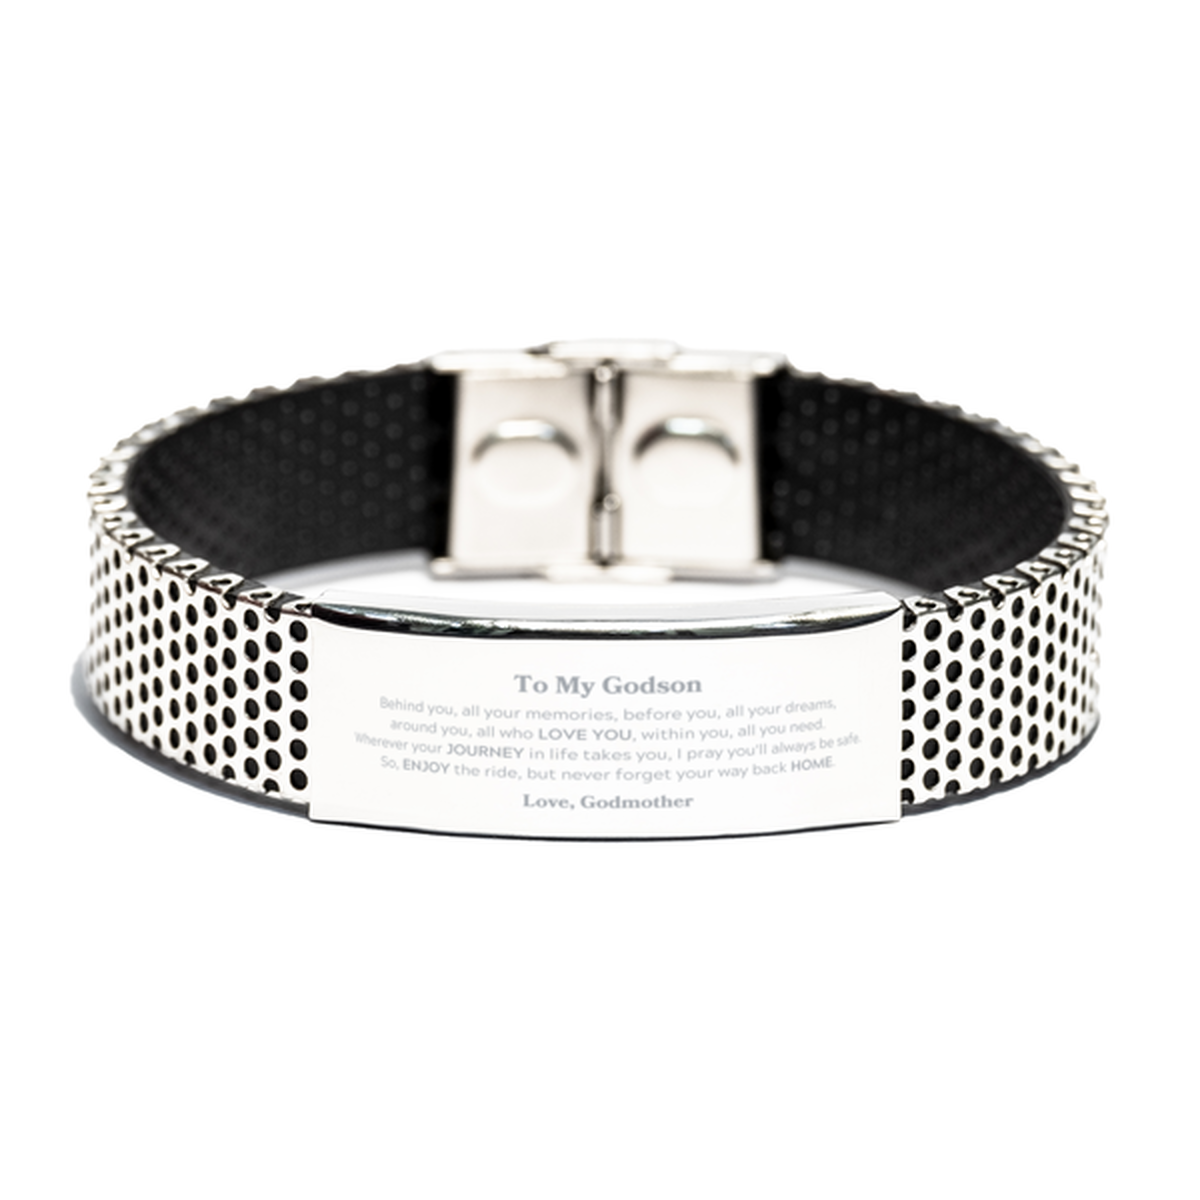 To My Godson Graduation Gifts from Godmother, Godson Stainless Steel Bracelet Christmas Birthday Gifts for Godson Behind you, all your memories, before you, all your dreams. Love, Godmother